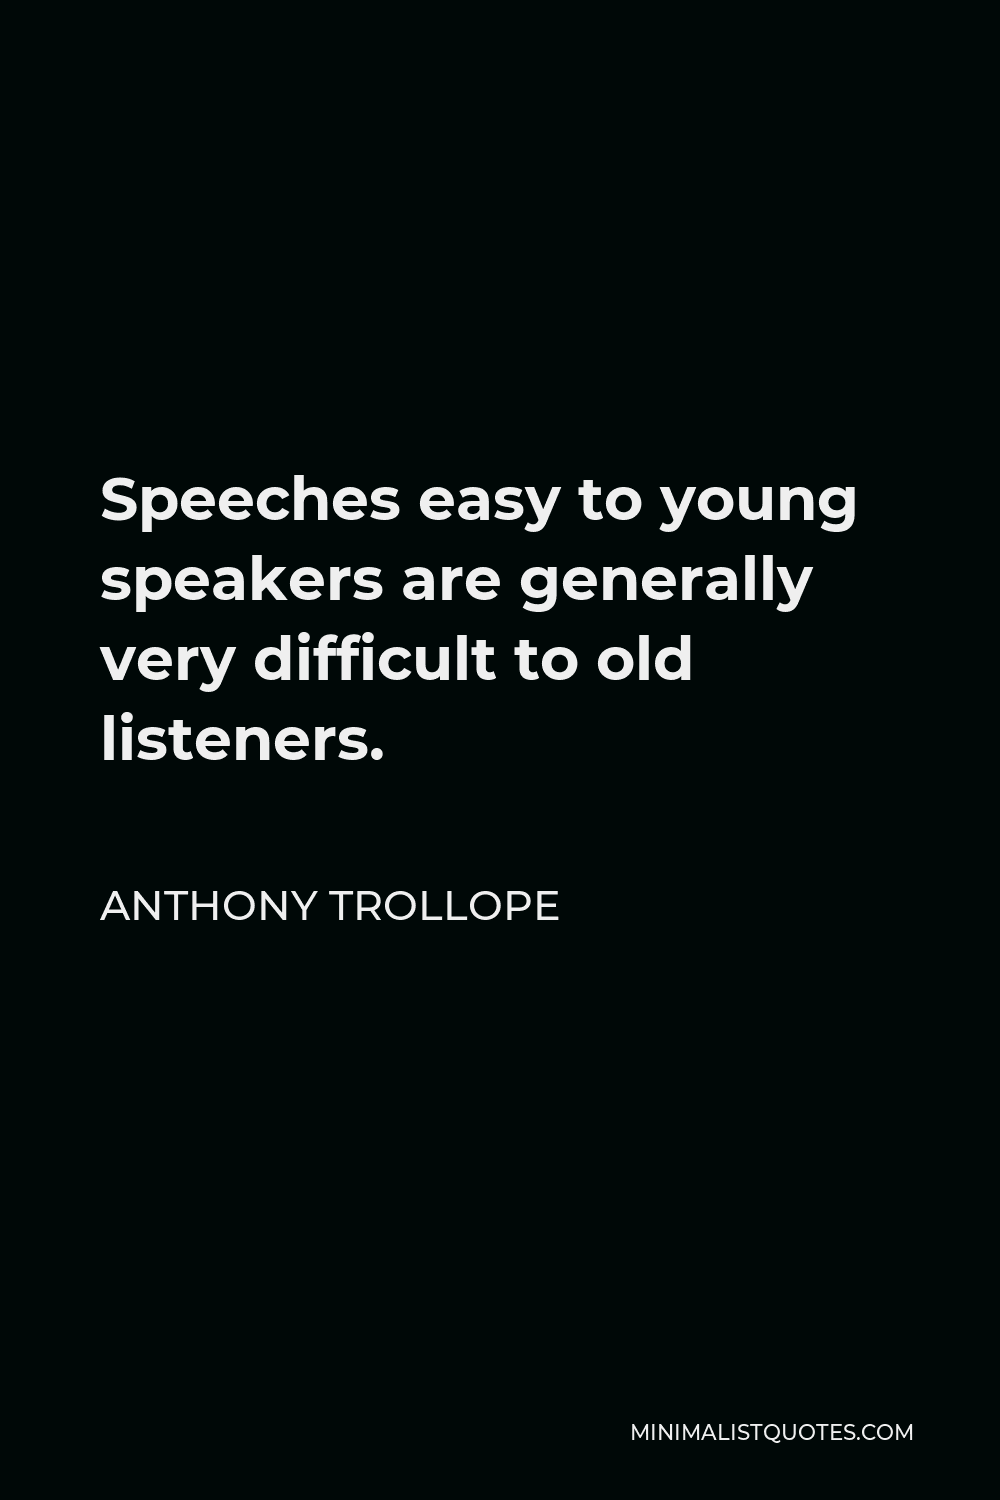 Anthony Trollope Quote - Speeches easy to young speakers are generally very difficult to old listeners.